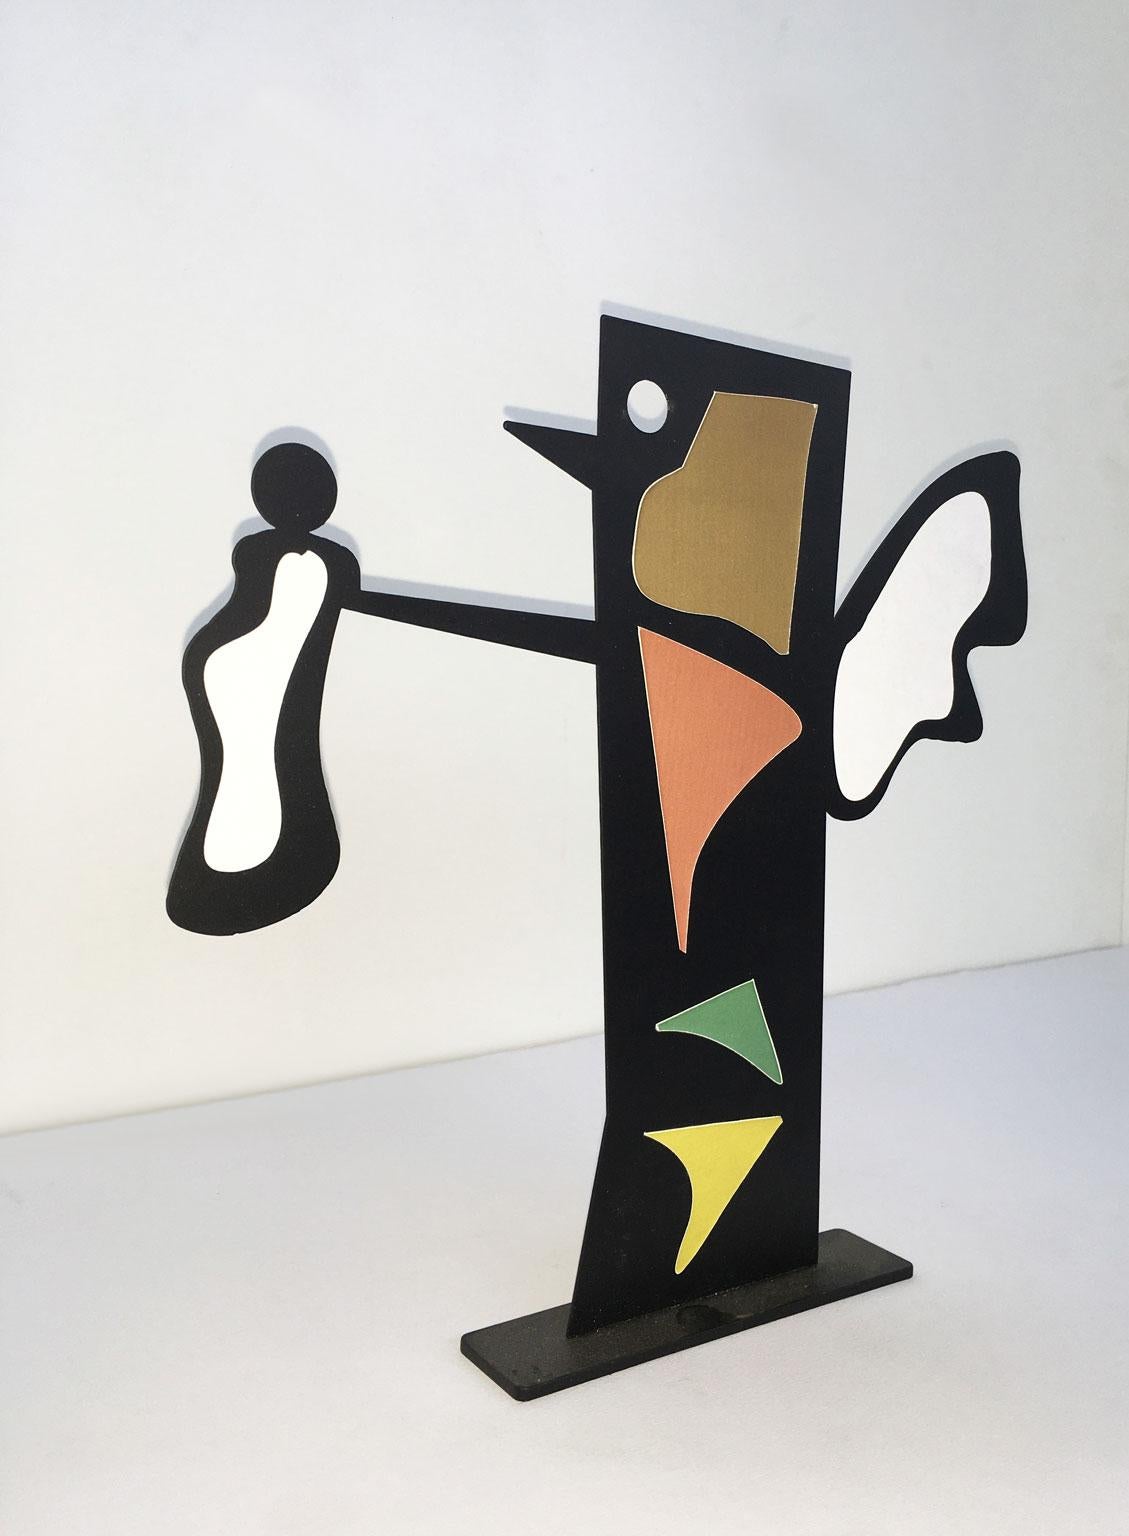 Italy 1980 Riccardo Dalisi Black Metal Painted Sculpture Caffellatte In Good Condition For Sale In Brescia, IT